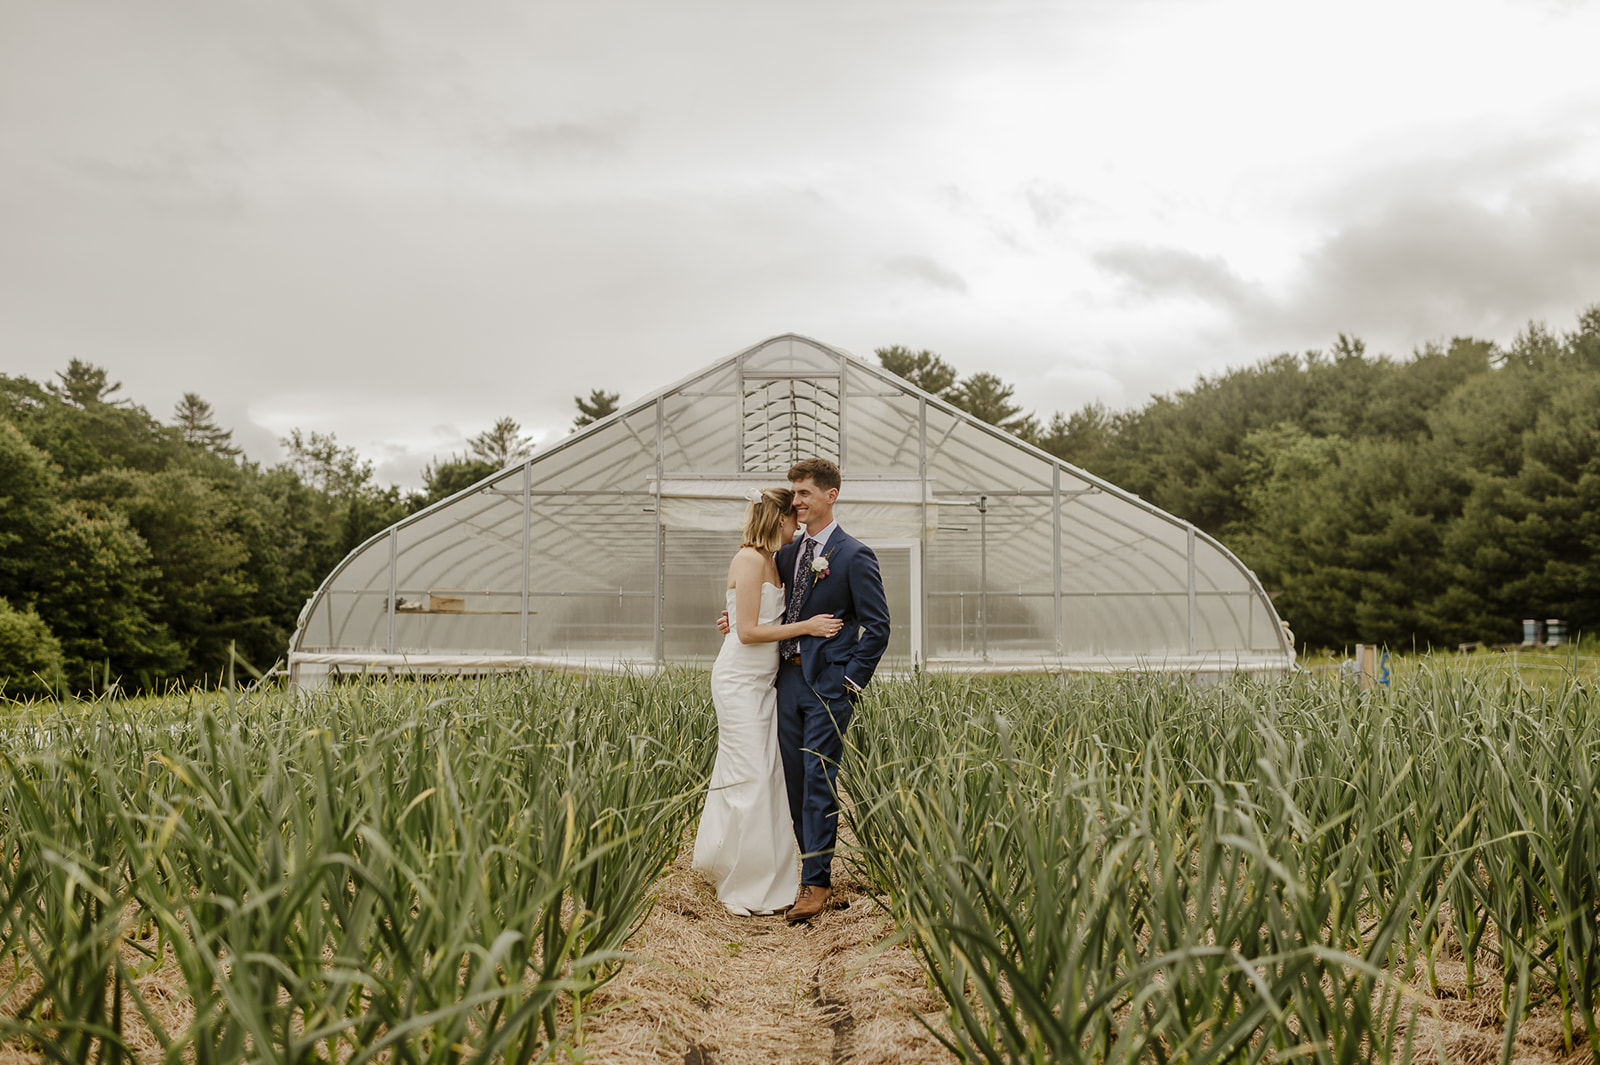 Bride and groom celebrate their love at an Eco-Friendly Venue